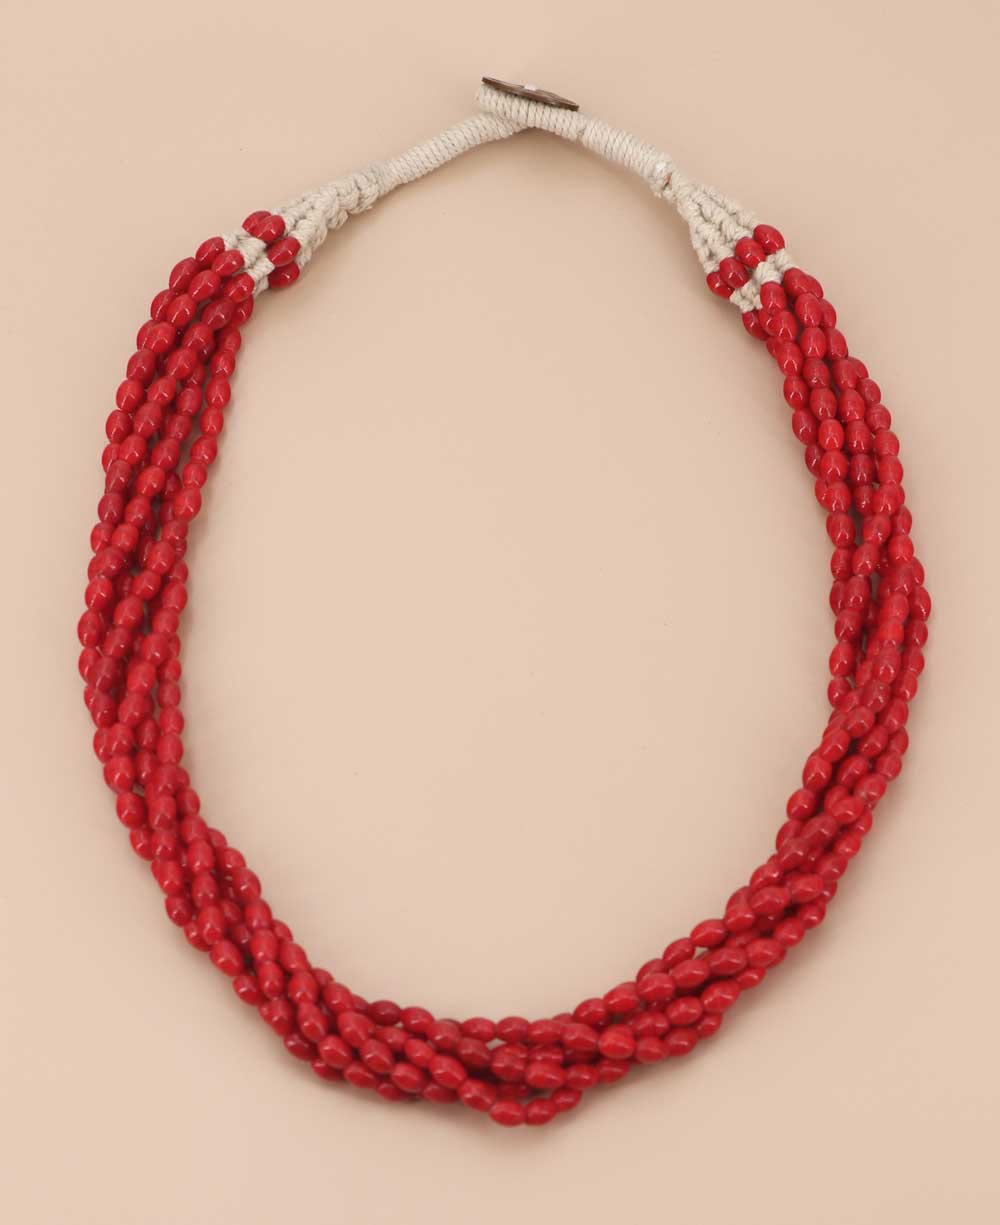 Six-strand red bead necklace